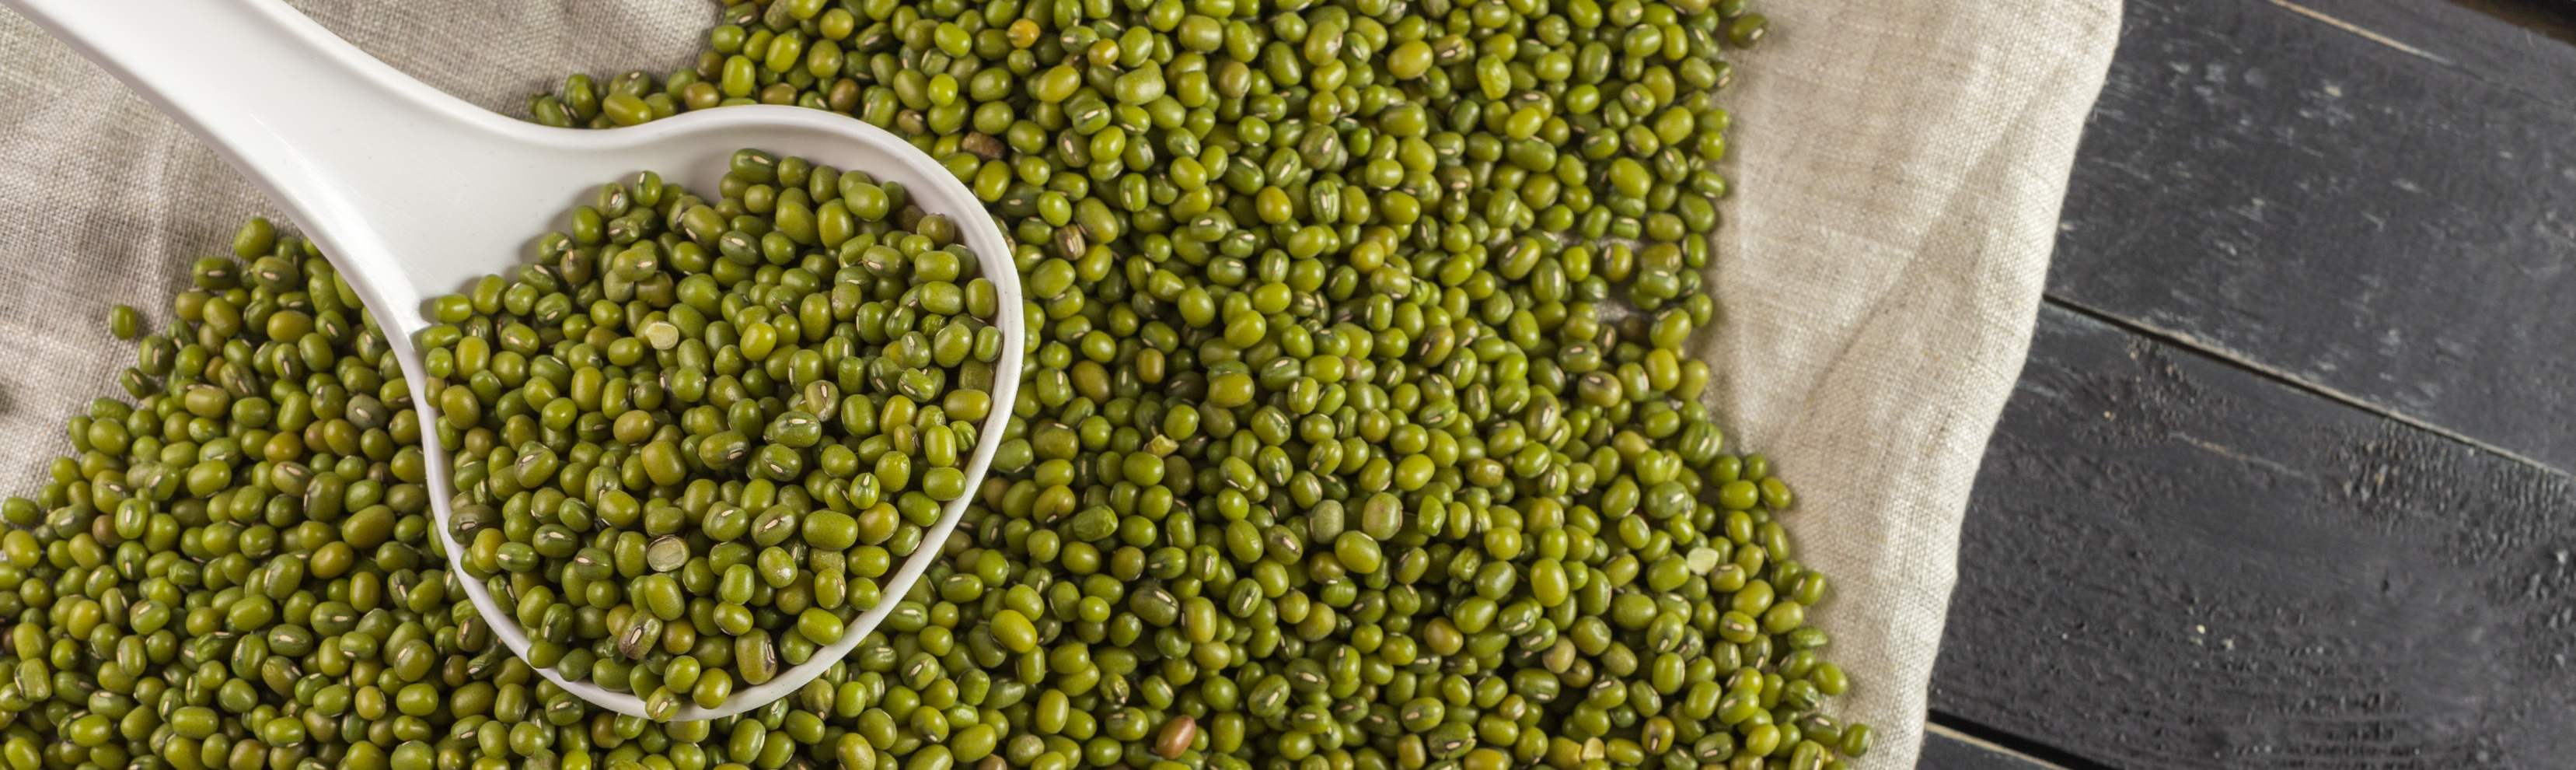 Room for improvement: unleashing the potential of the mungbean